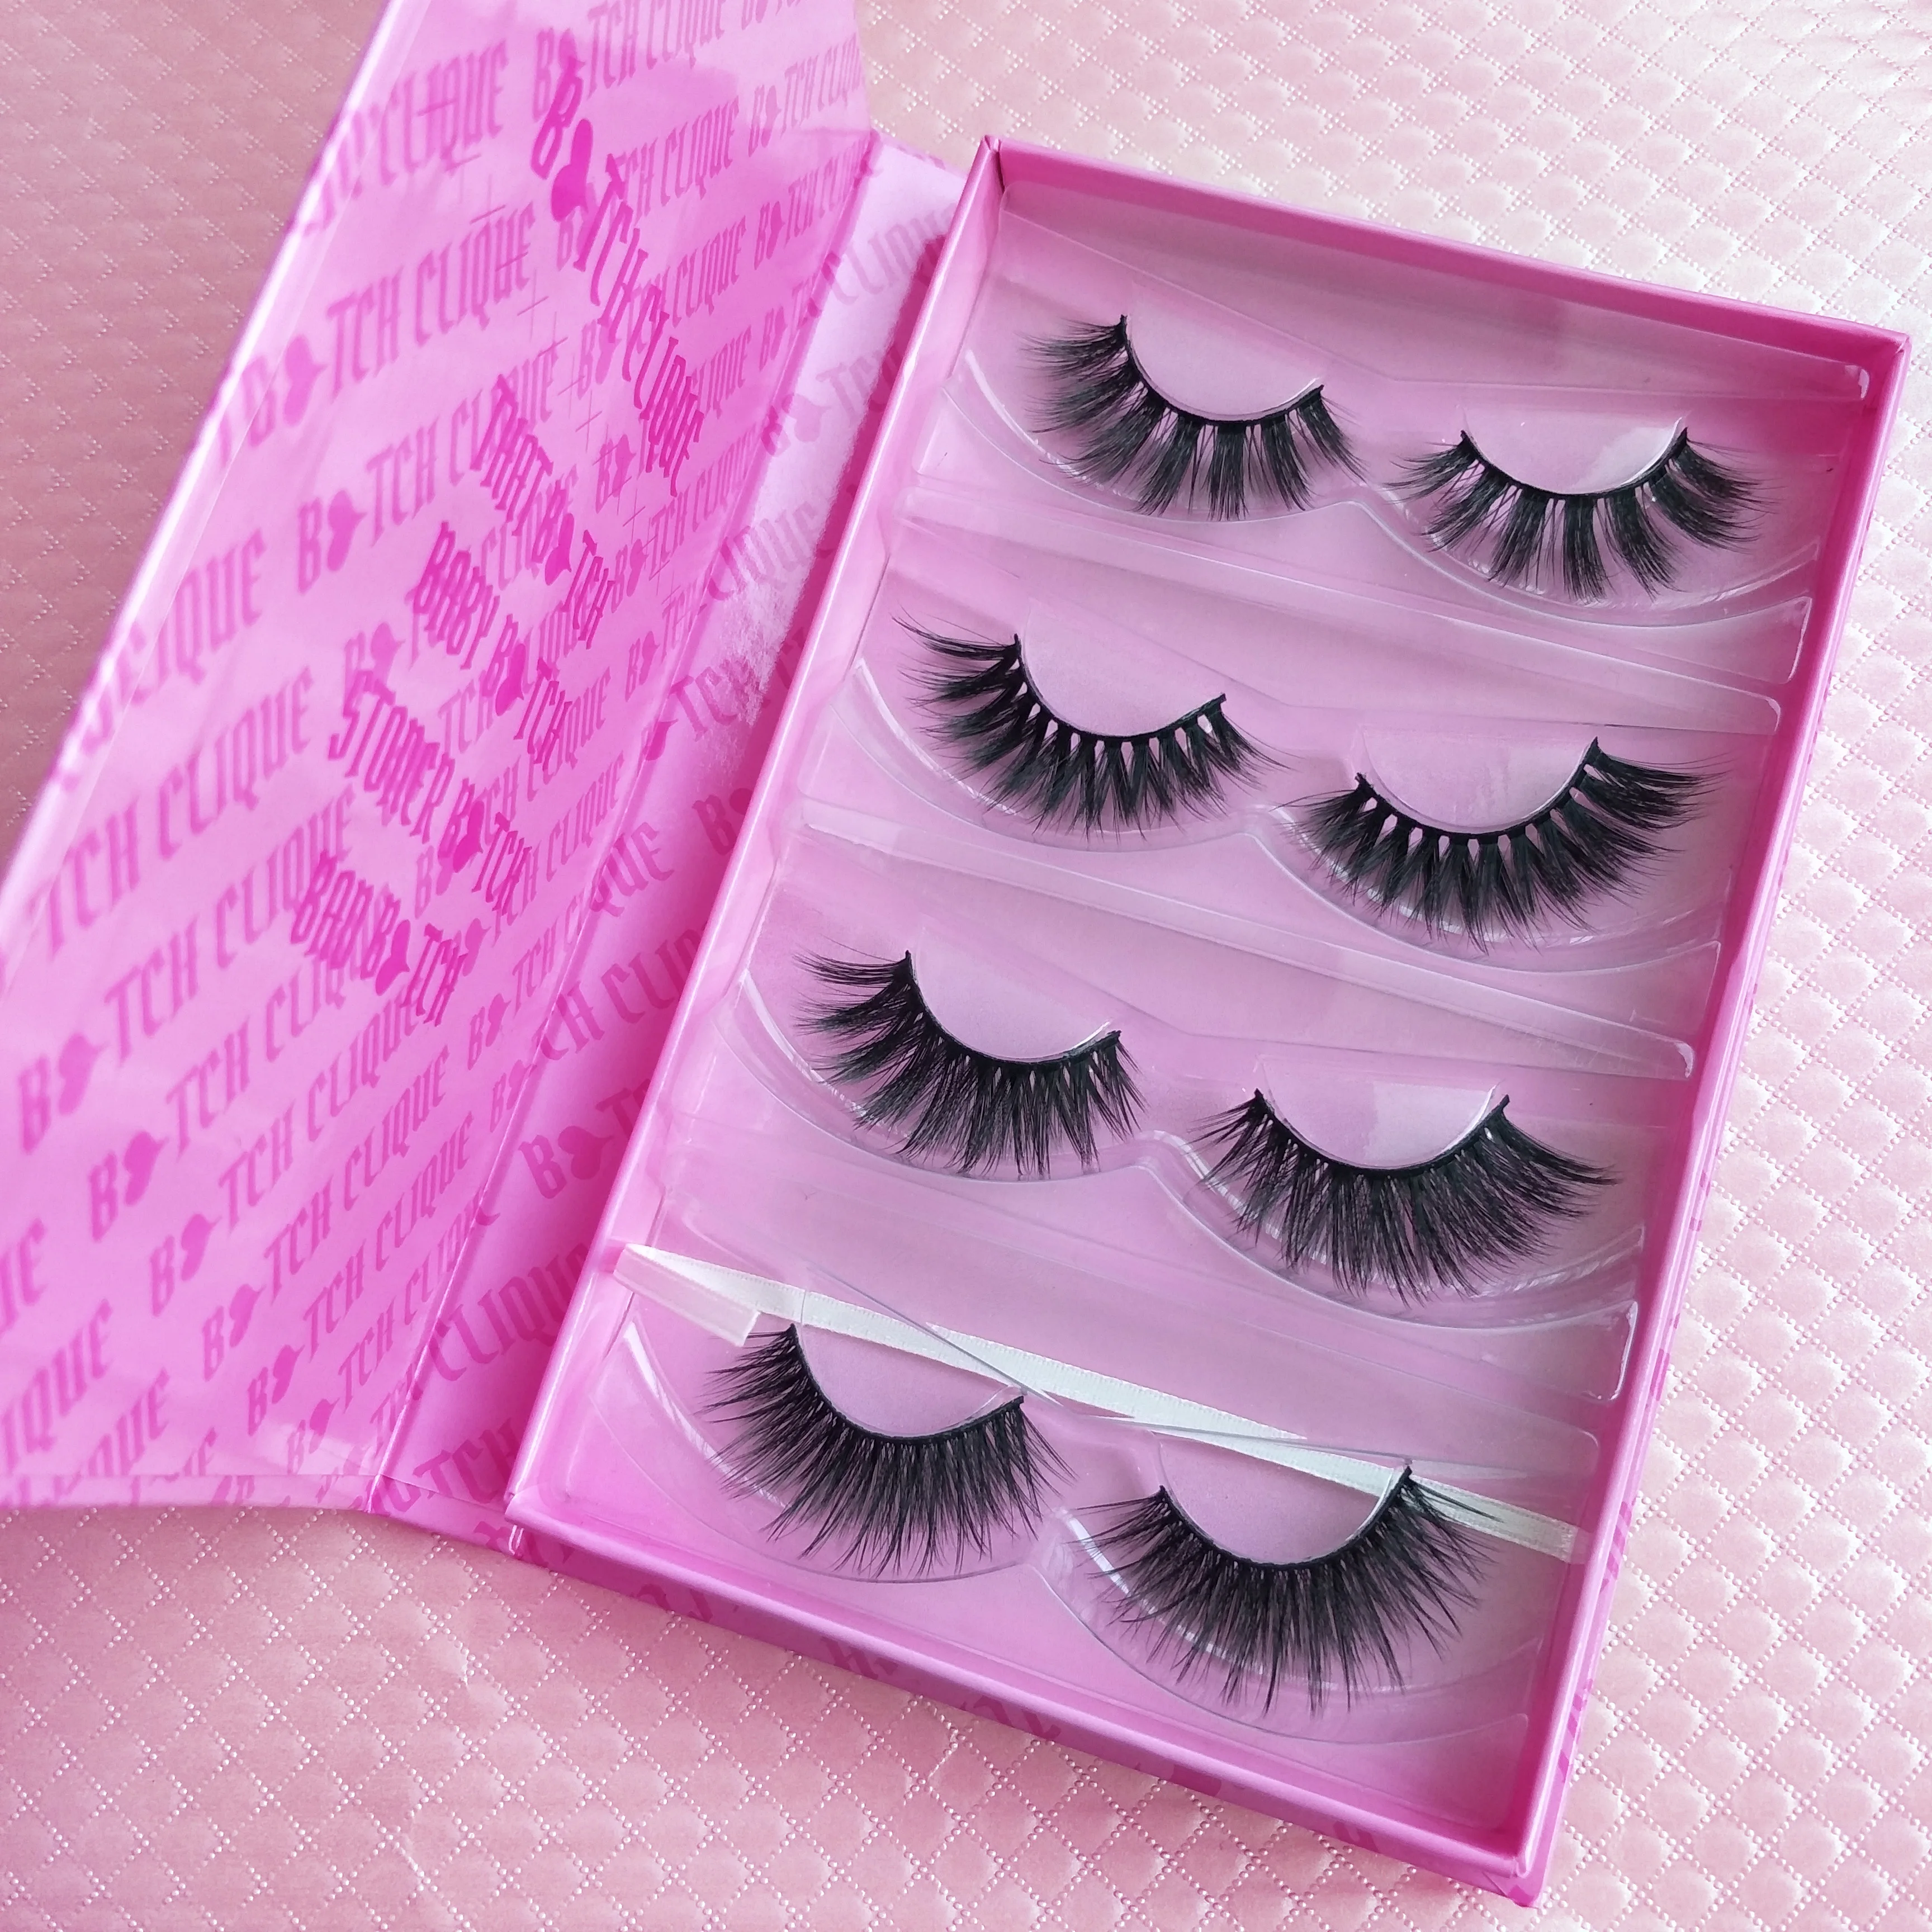 

Custom Box Your Own Brand Supplies Wholesale 16Pairs Paper Lash Book mink lash with packaging holographic lash case, Black